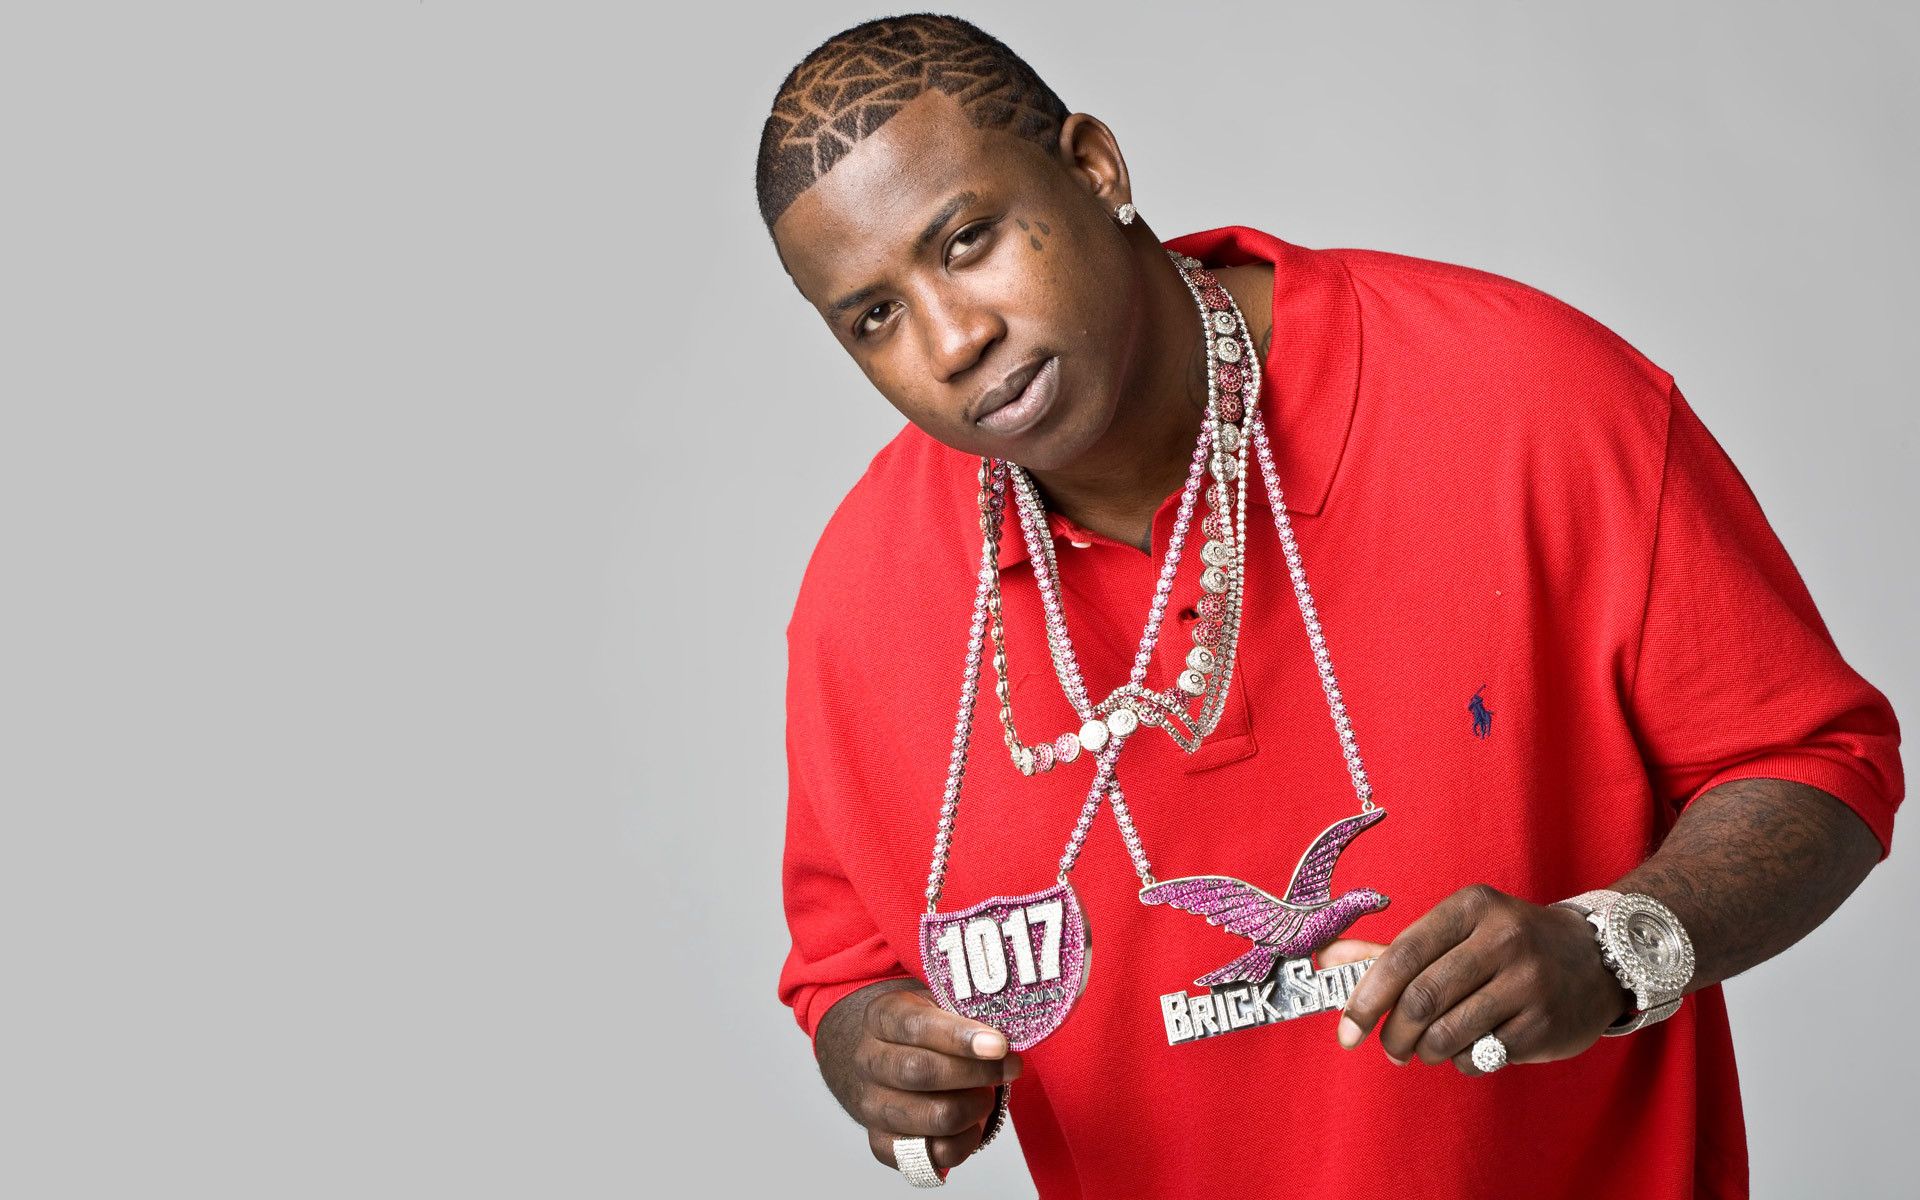 Gucci Mane Wallpaper Image Photo Picture Background